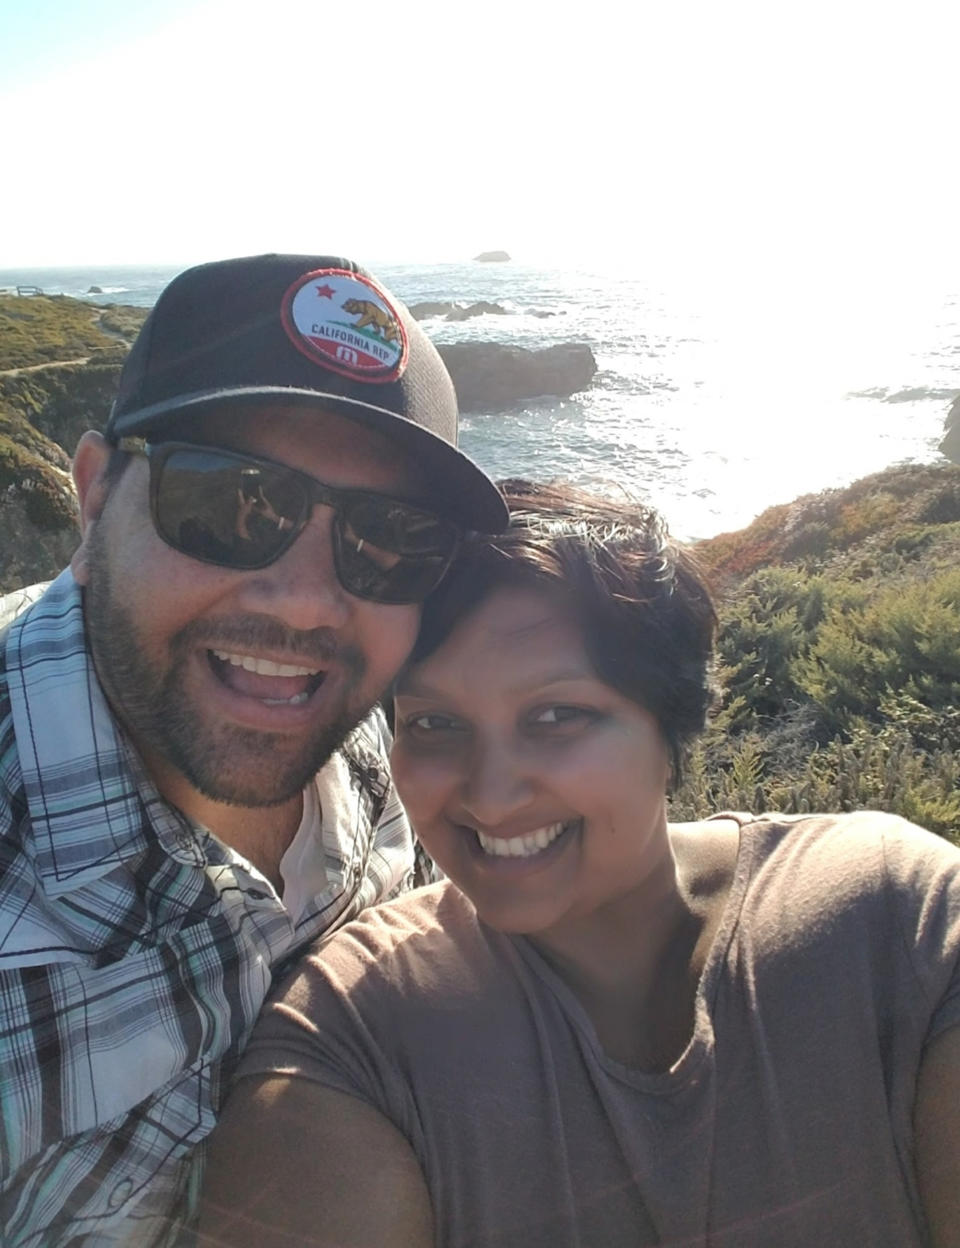 After learning she had stage 4 lung cancer, Tabitha Paccione and her family took a road trip down the coast of California stopping in towns she never knew existed. She is focused on enjoying her time with her children and husband.  (Courtesy Tabitha Paccione)